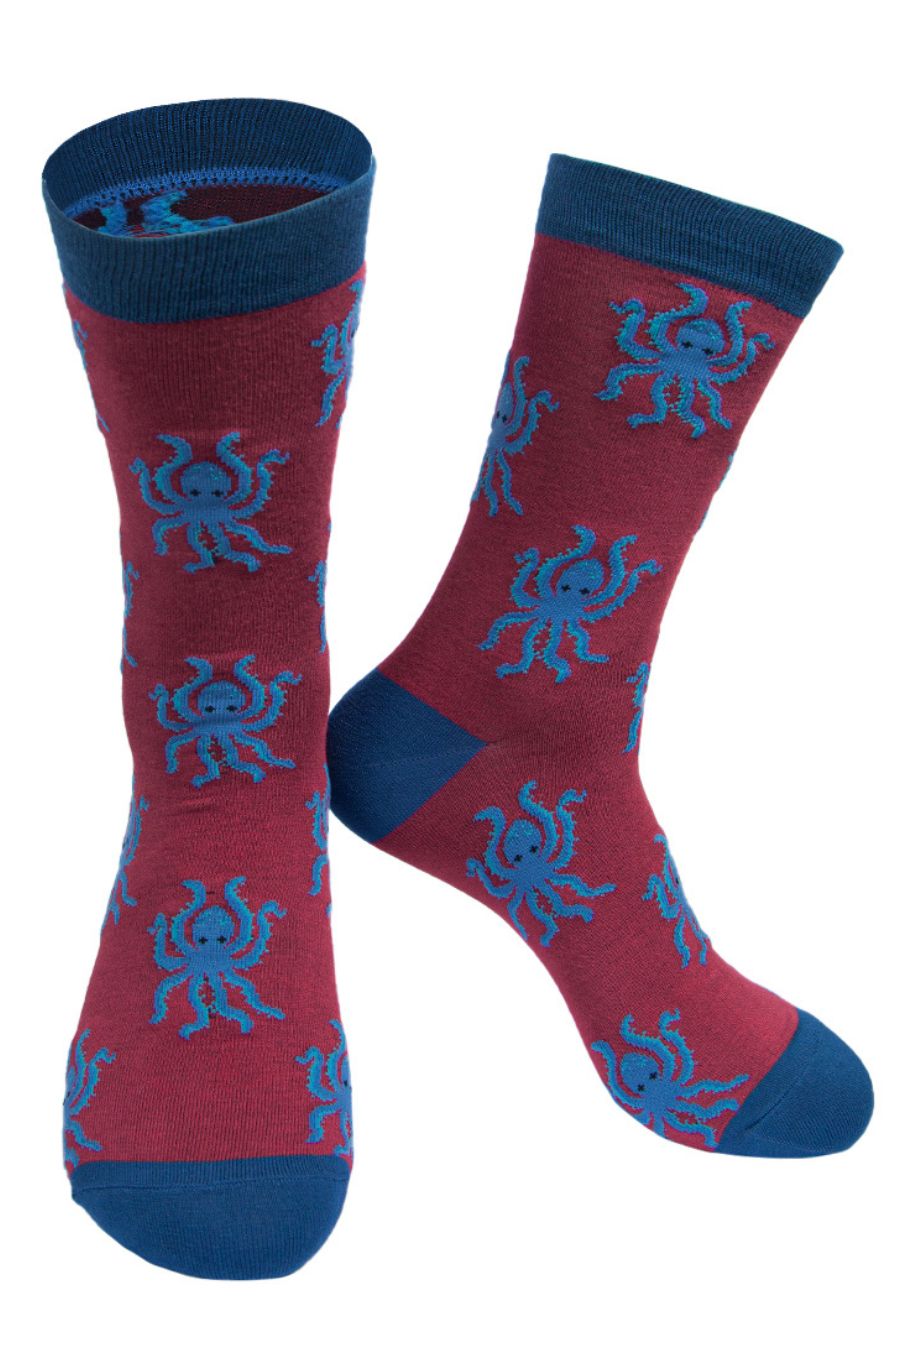 burgundy dress socks with a pattern of blue octopus